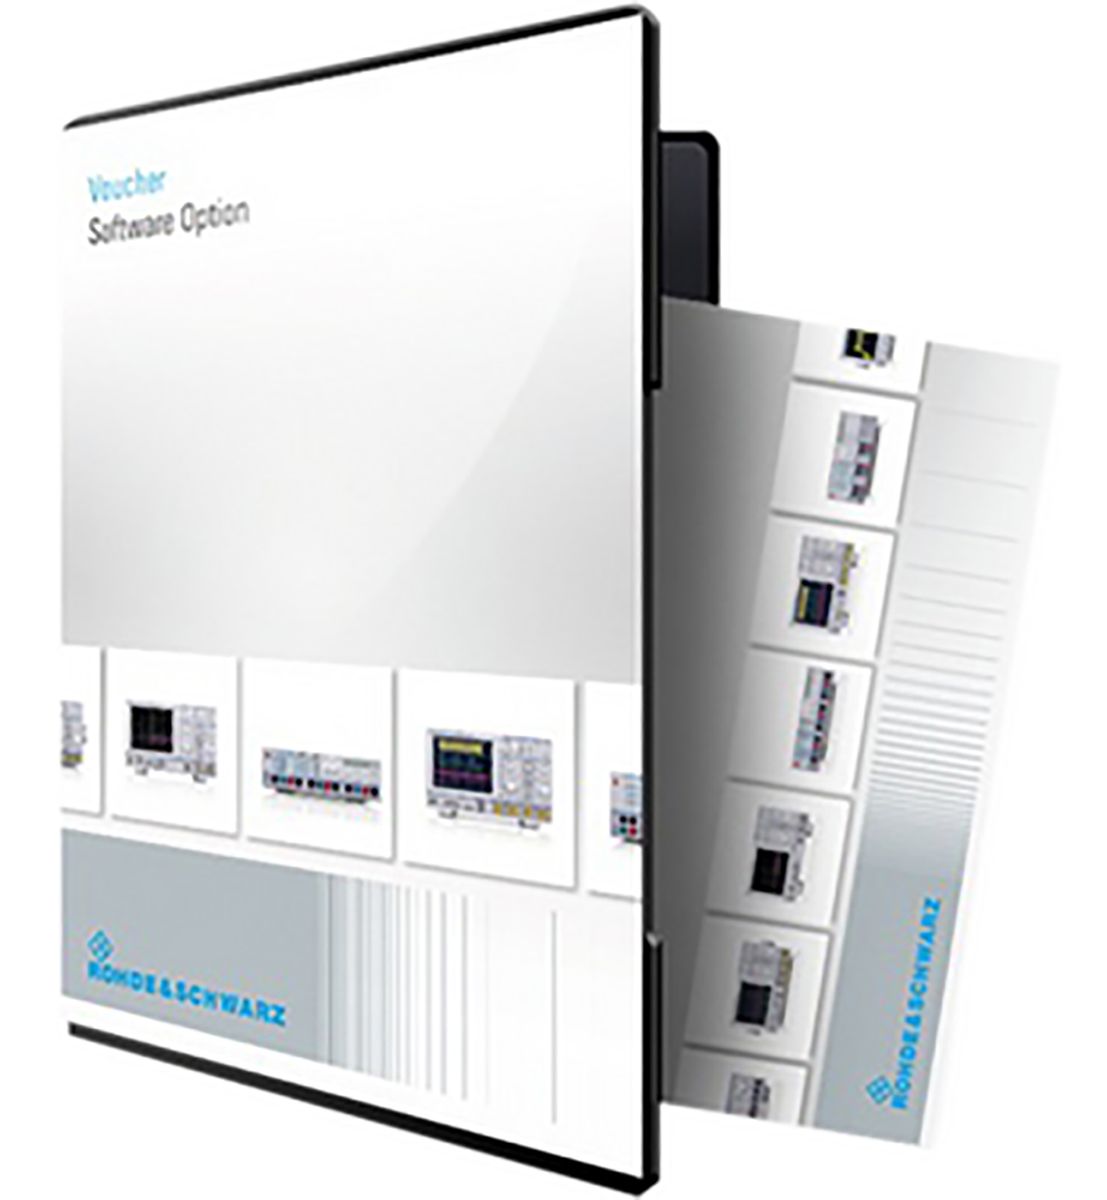 Rohde & Schwarz FPC-B200 Wi-Fi Connection Support, For Use With FPC1000 Spectrum Analyser With UKAS Calibration